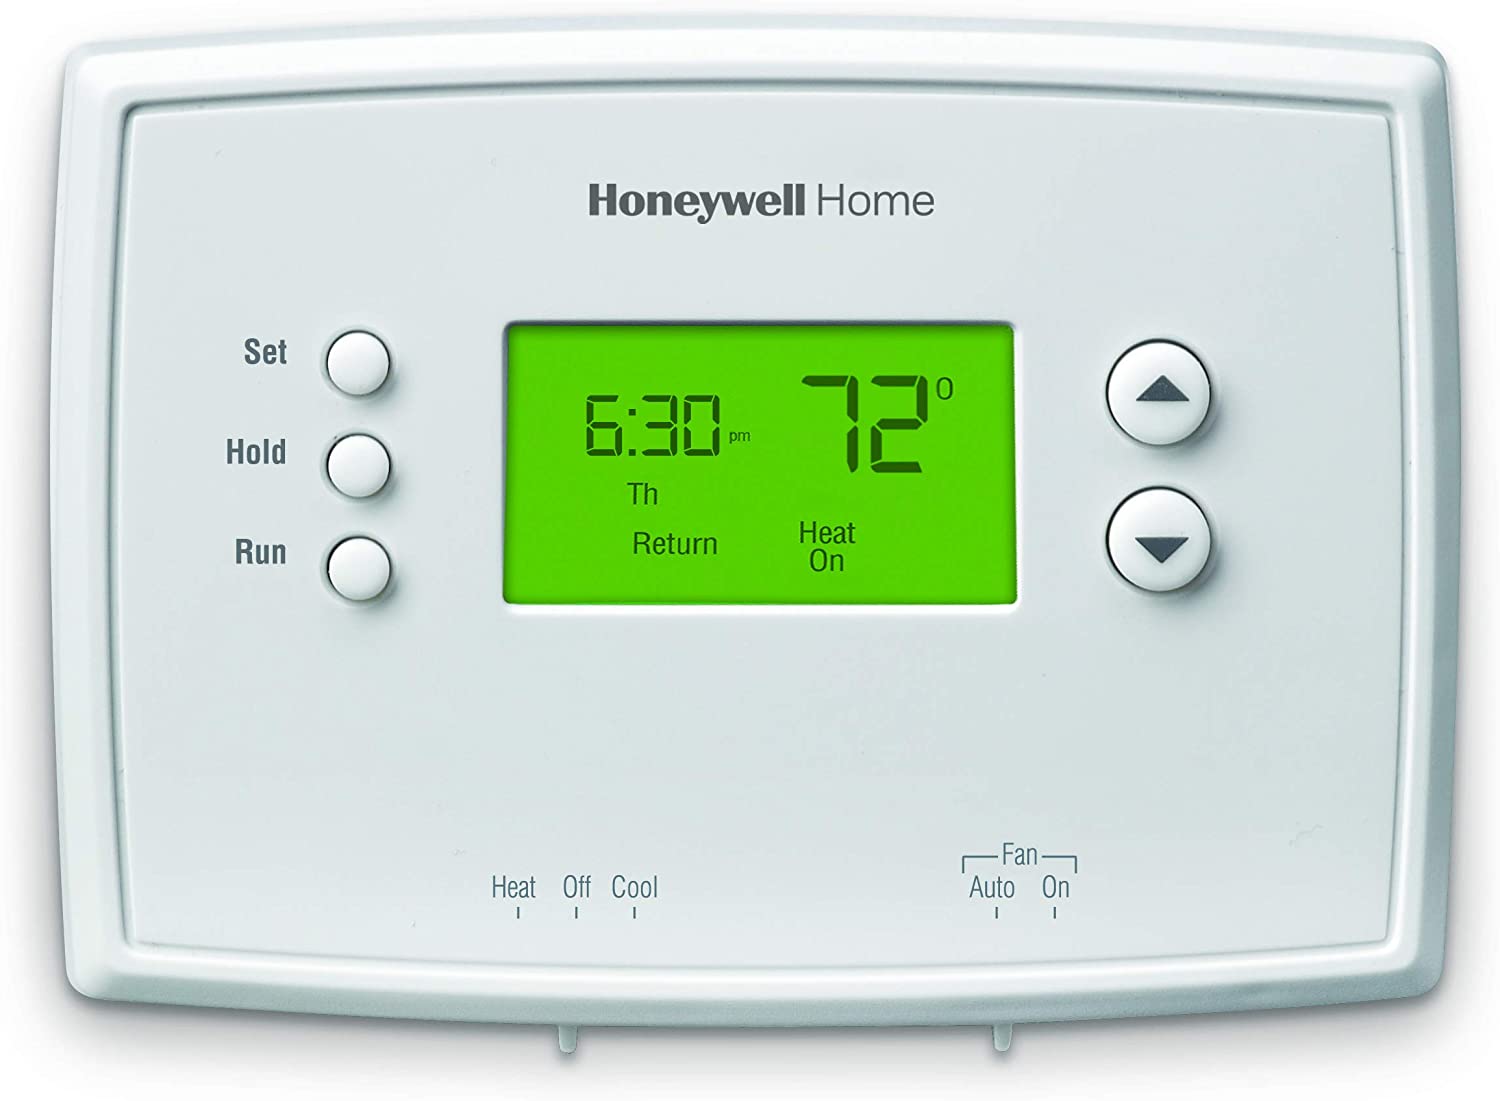 lot-detail-honeywell-home-programmable-thermostat